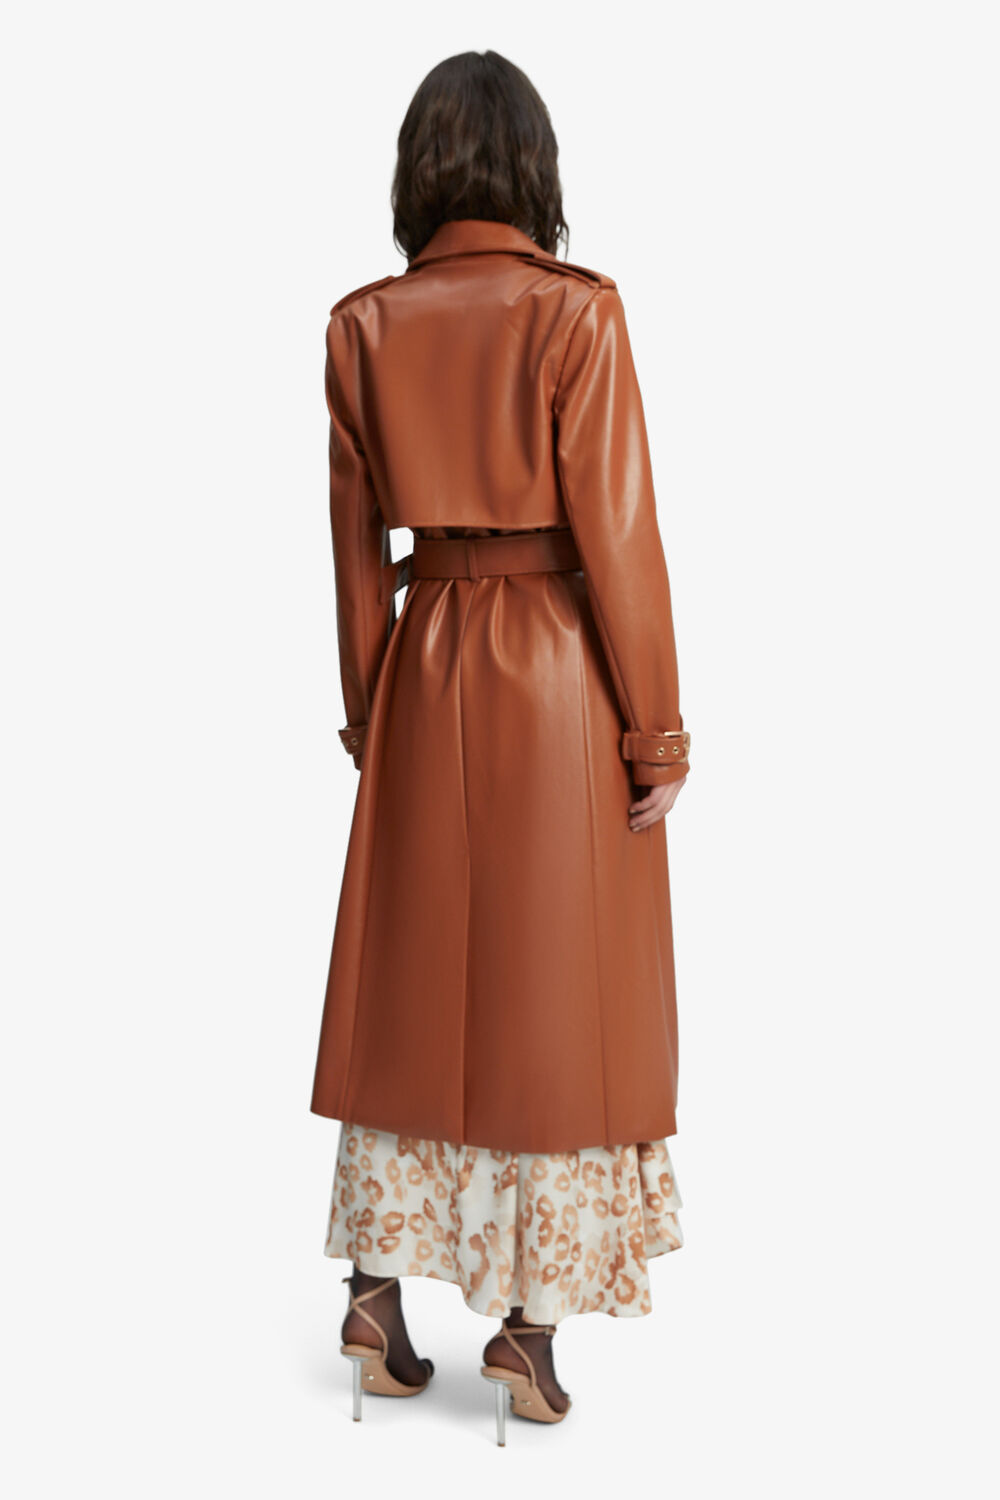 VEGAN LEATHER TRENCH COAT in colour TAN